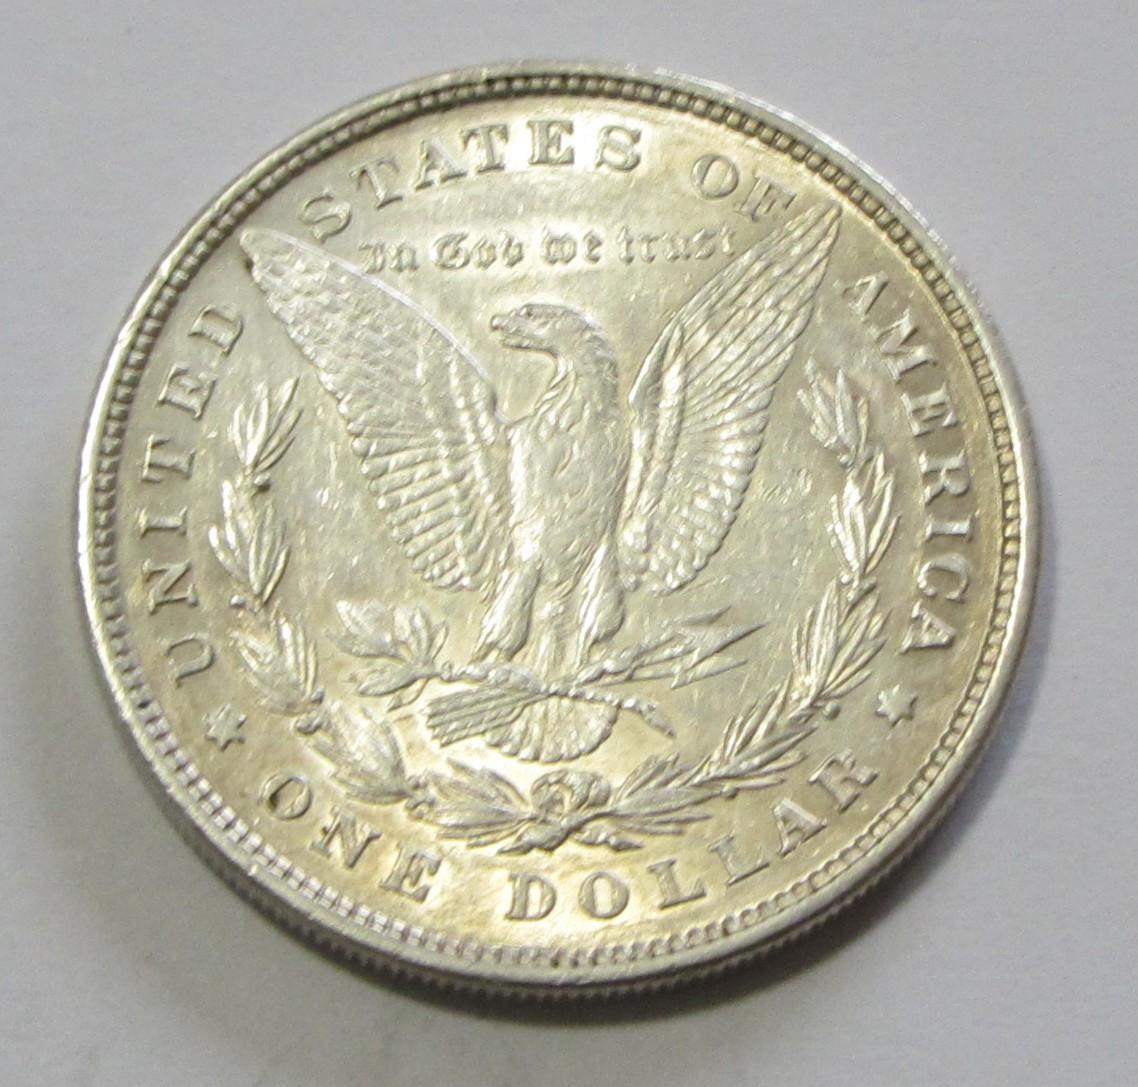 $1 8 TAIL FEATHERS MORGAN 1878